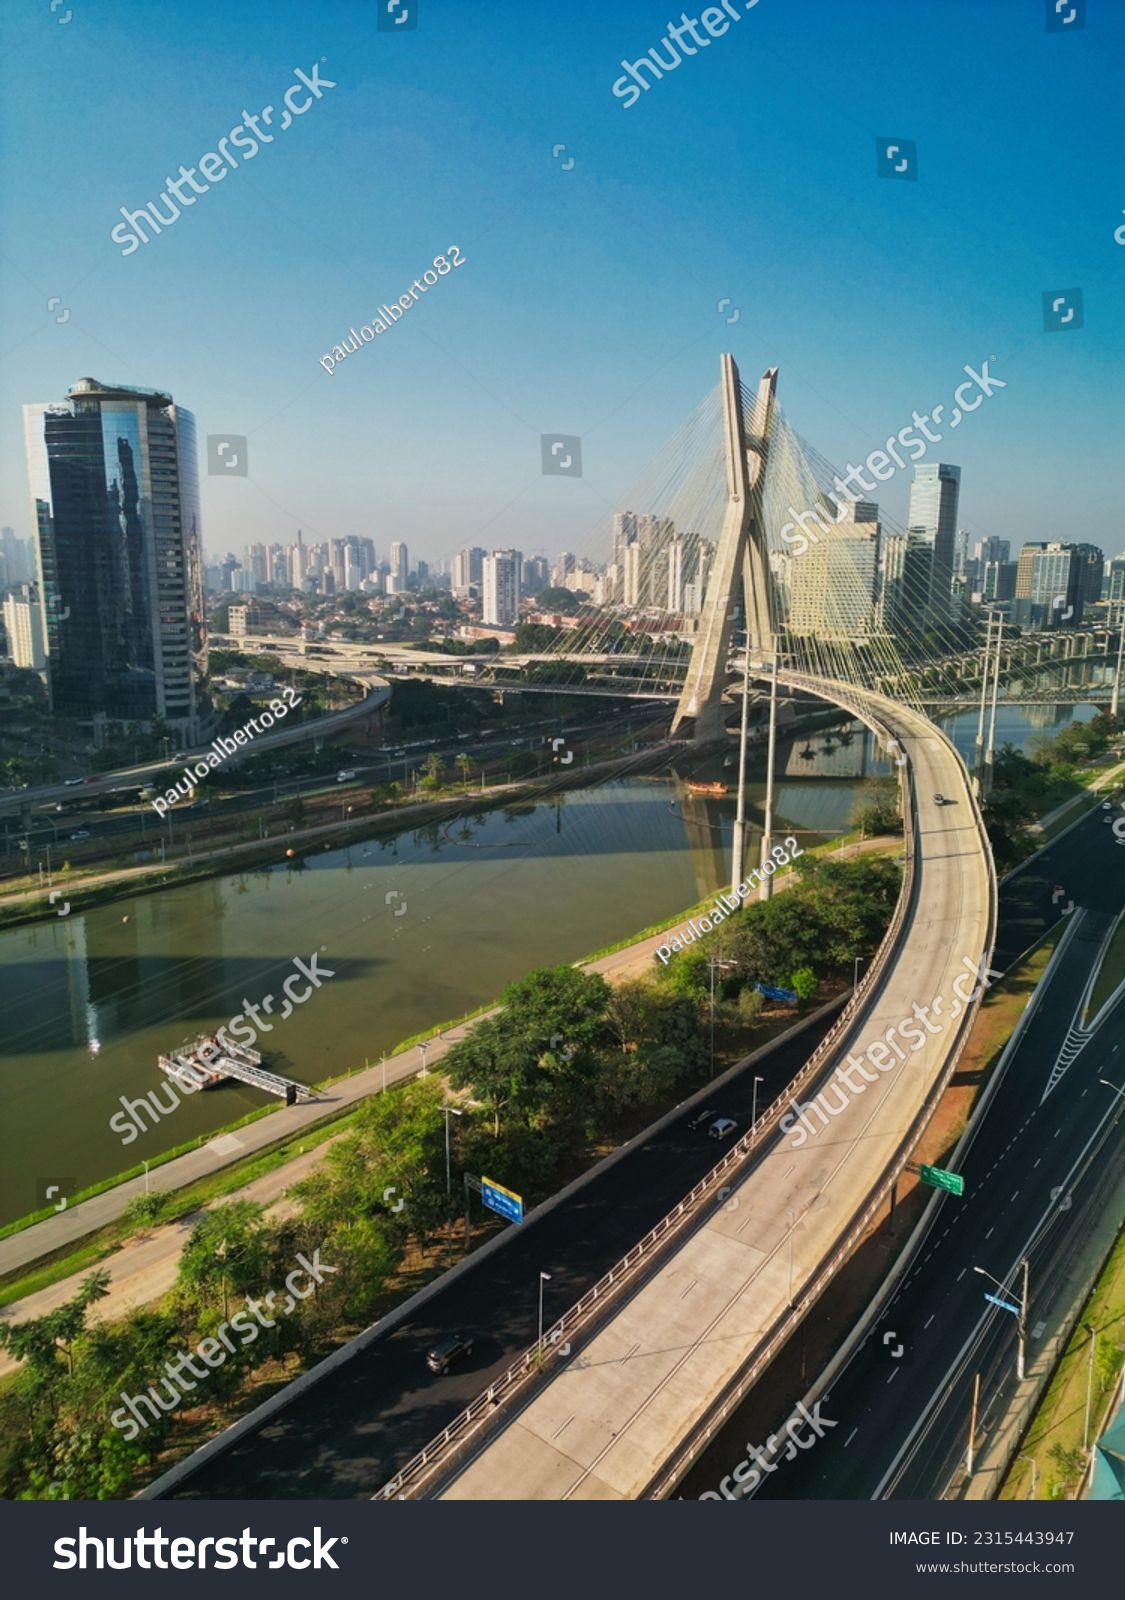 2023 view of the Pinheiros river with modern buildings beside it and the famous Octavio Frias de Oliveira bridge in the city of São Paulo. #2315443947